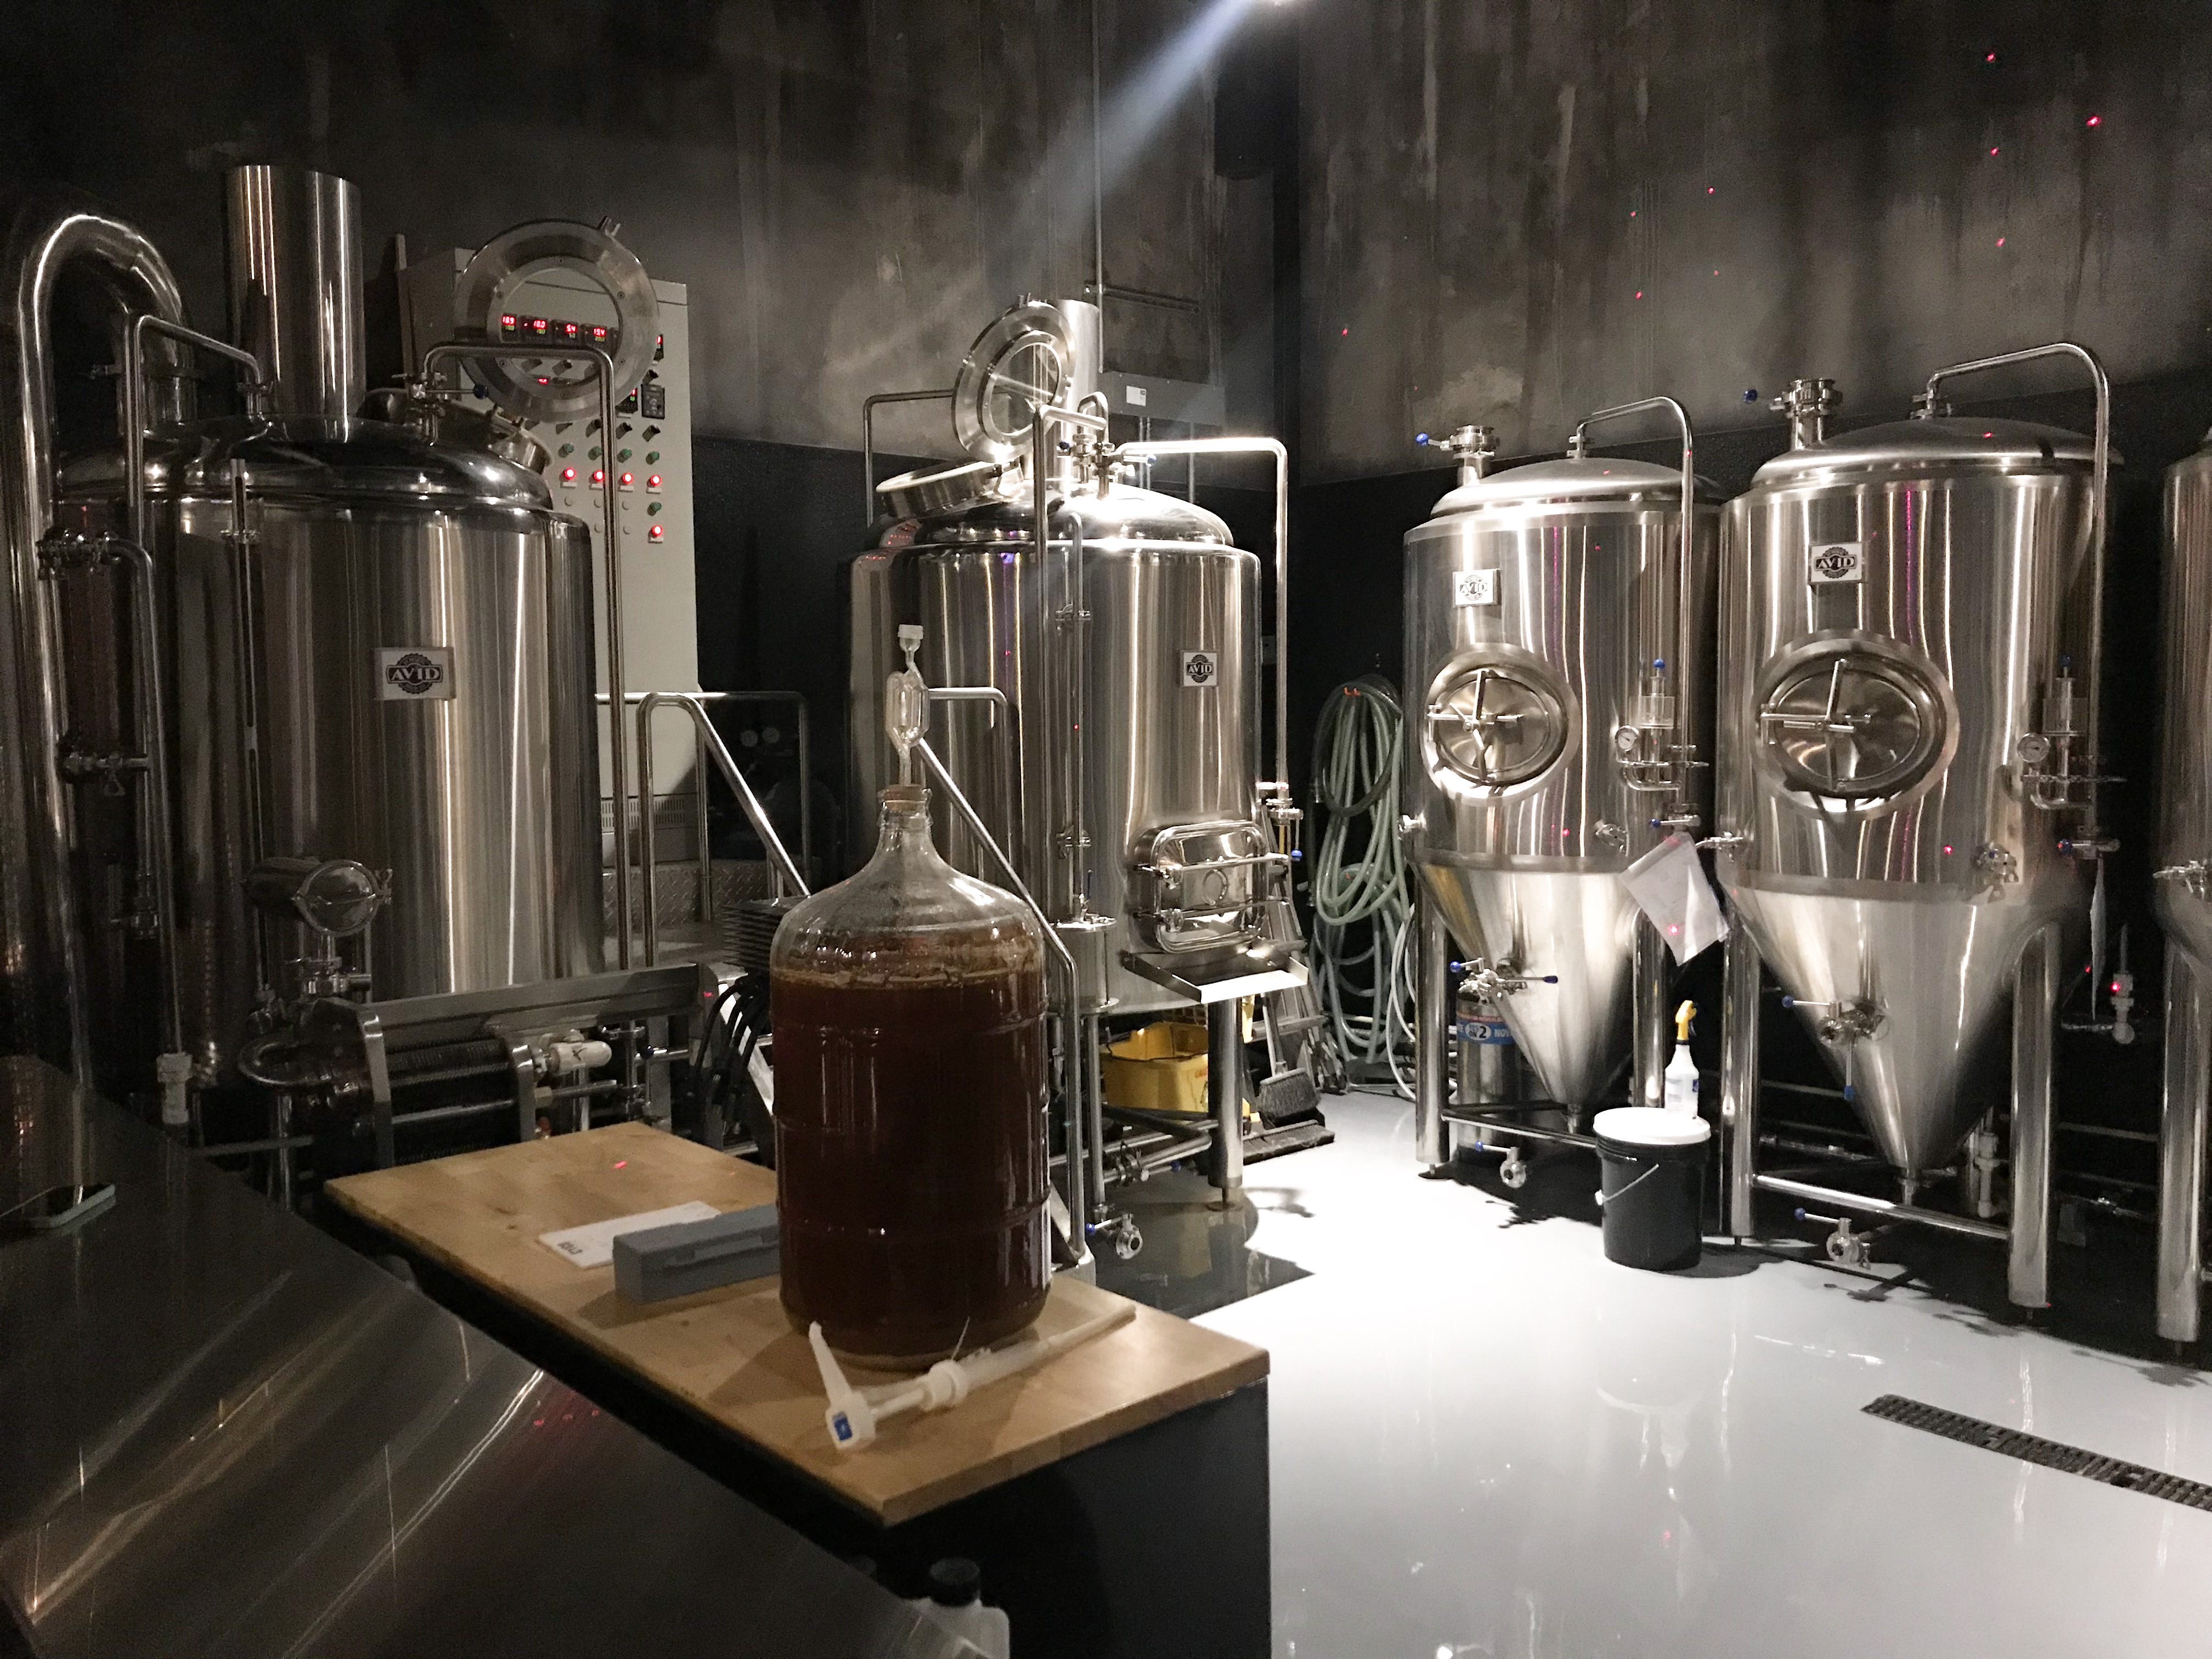 Beer tanks in the taproom